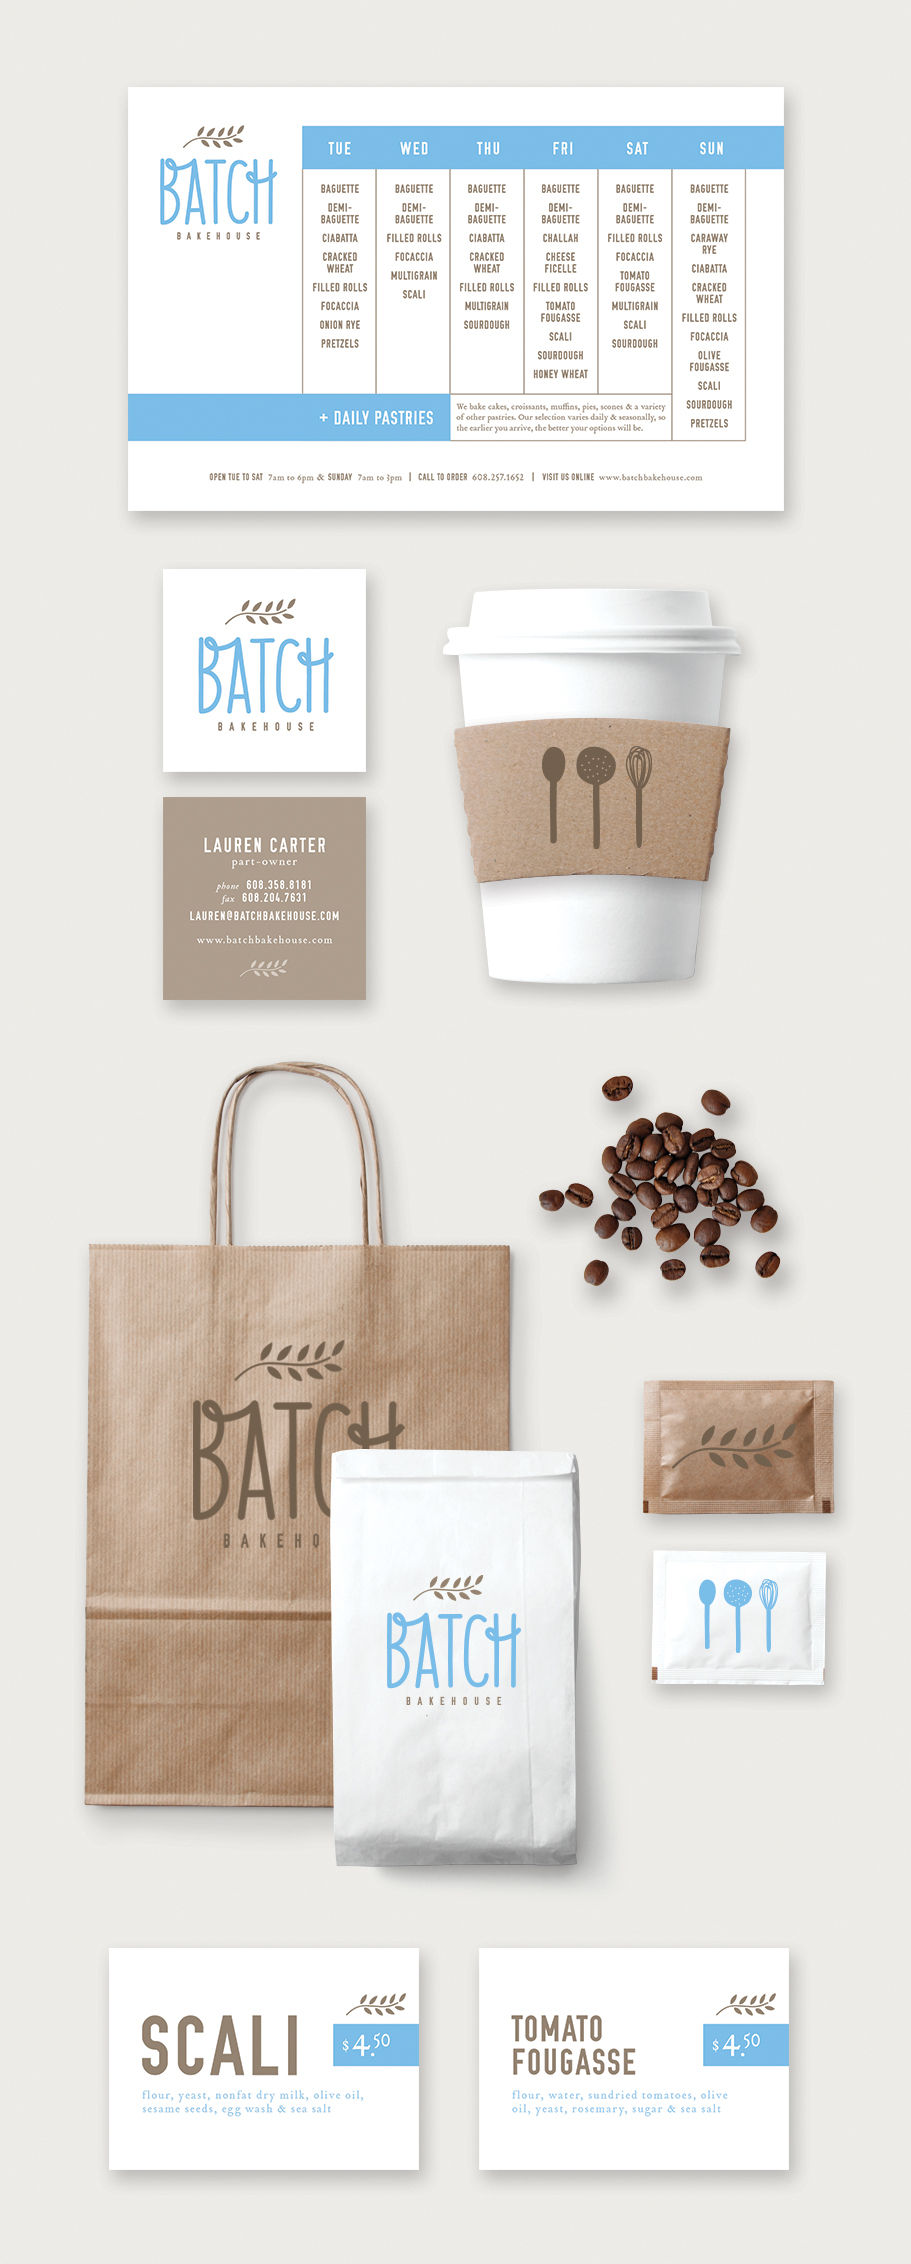 bakery Bakehouse hand-rendered type icons canvas bags Website